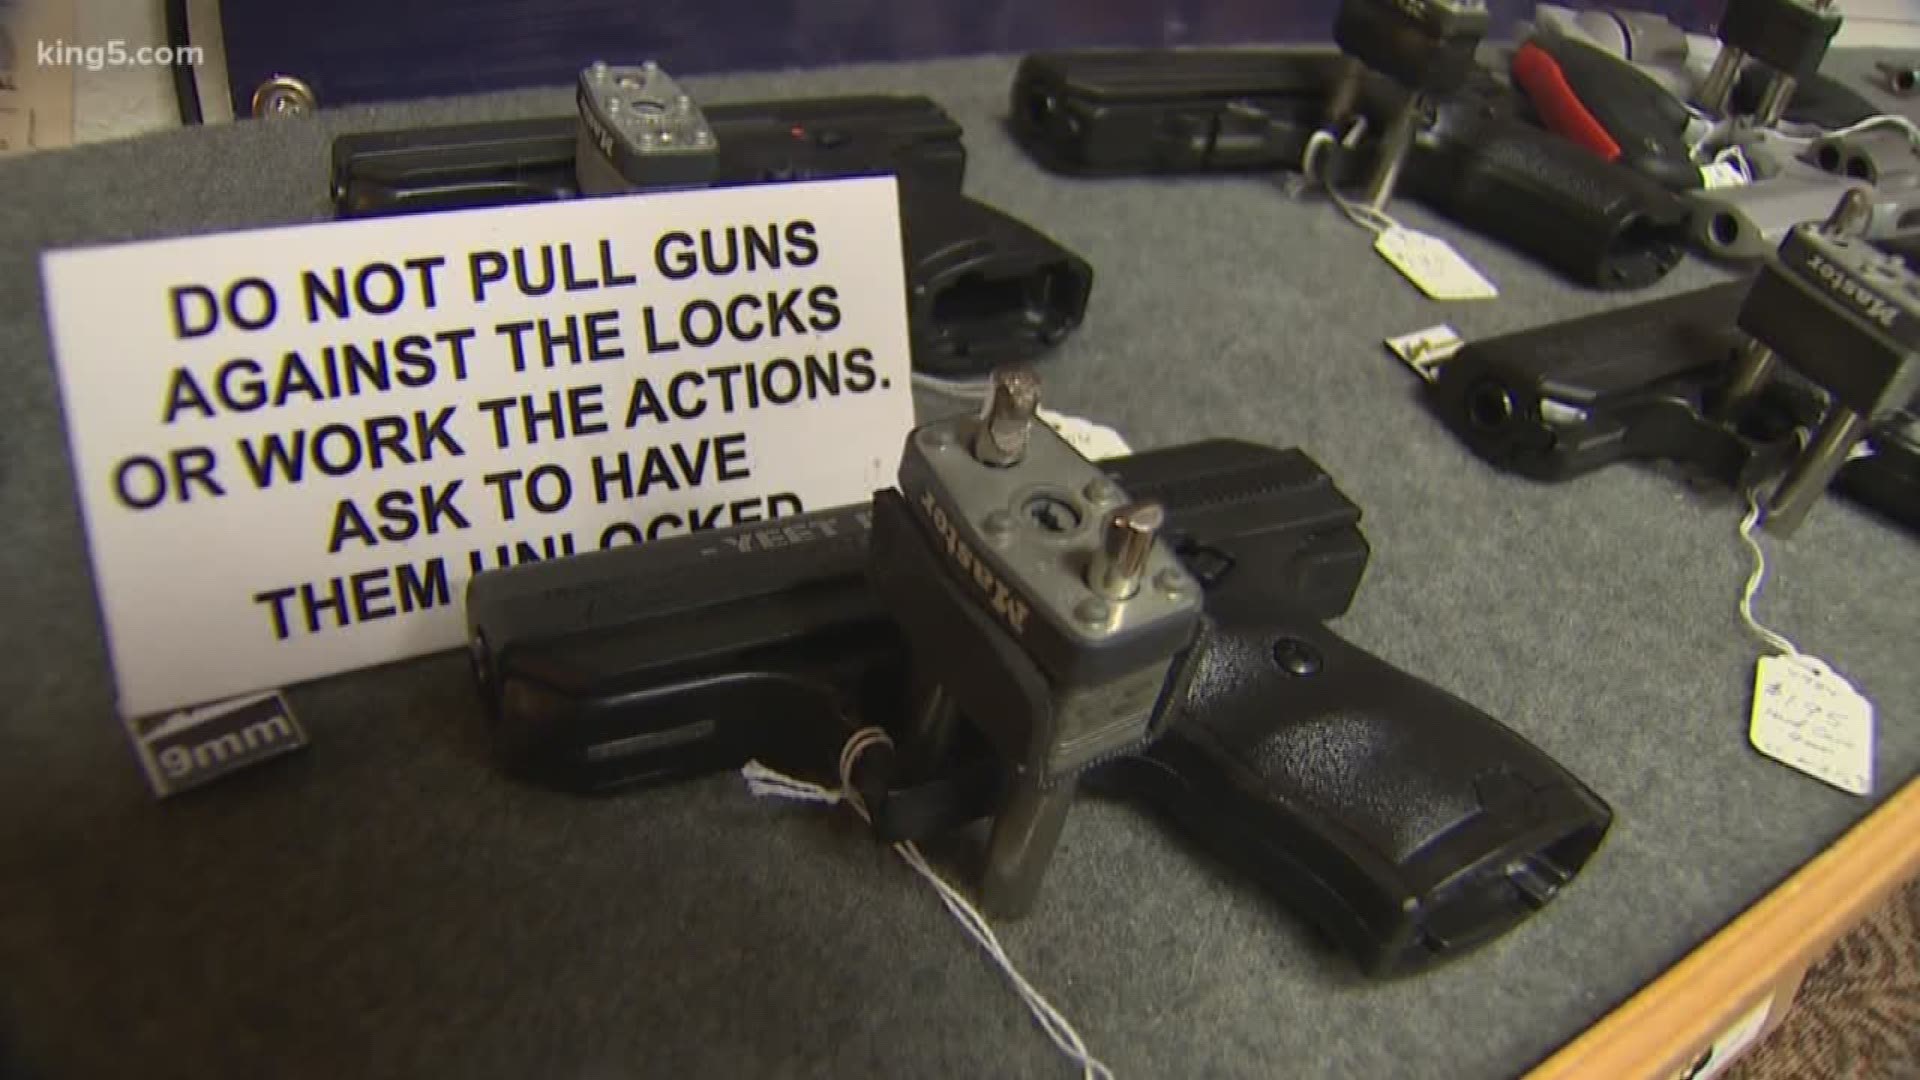 Some gun shop owners in Tacoma fear a new gun tax proposal going through City Council will put them out of business if it’s passed.